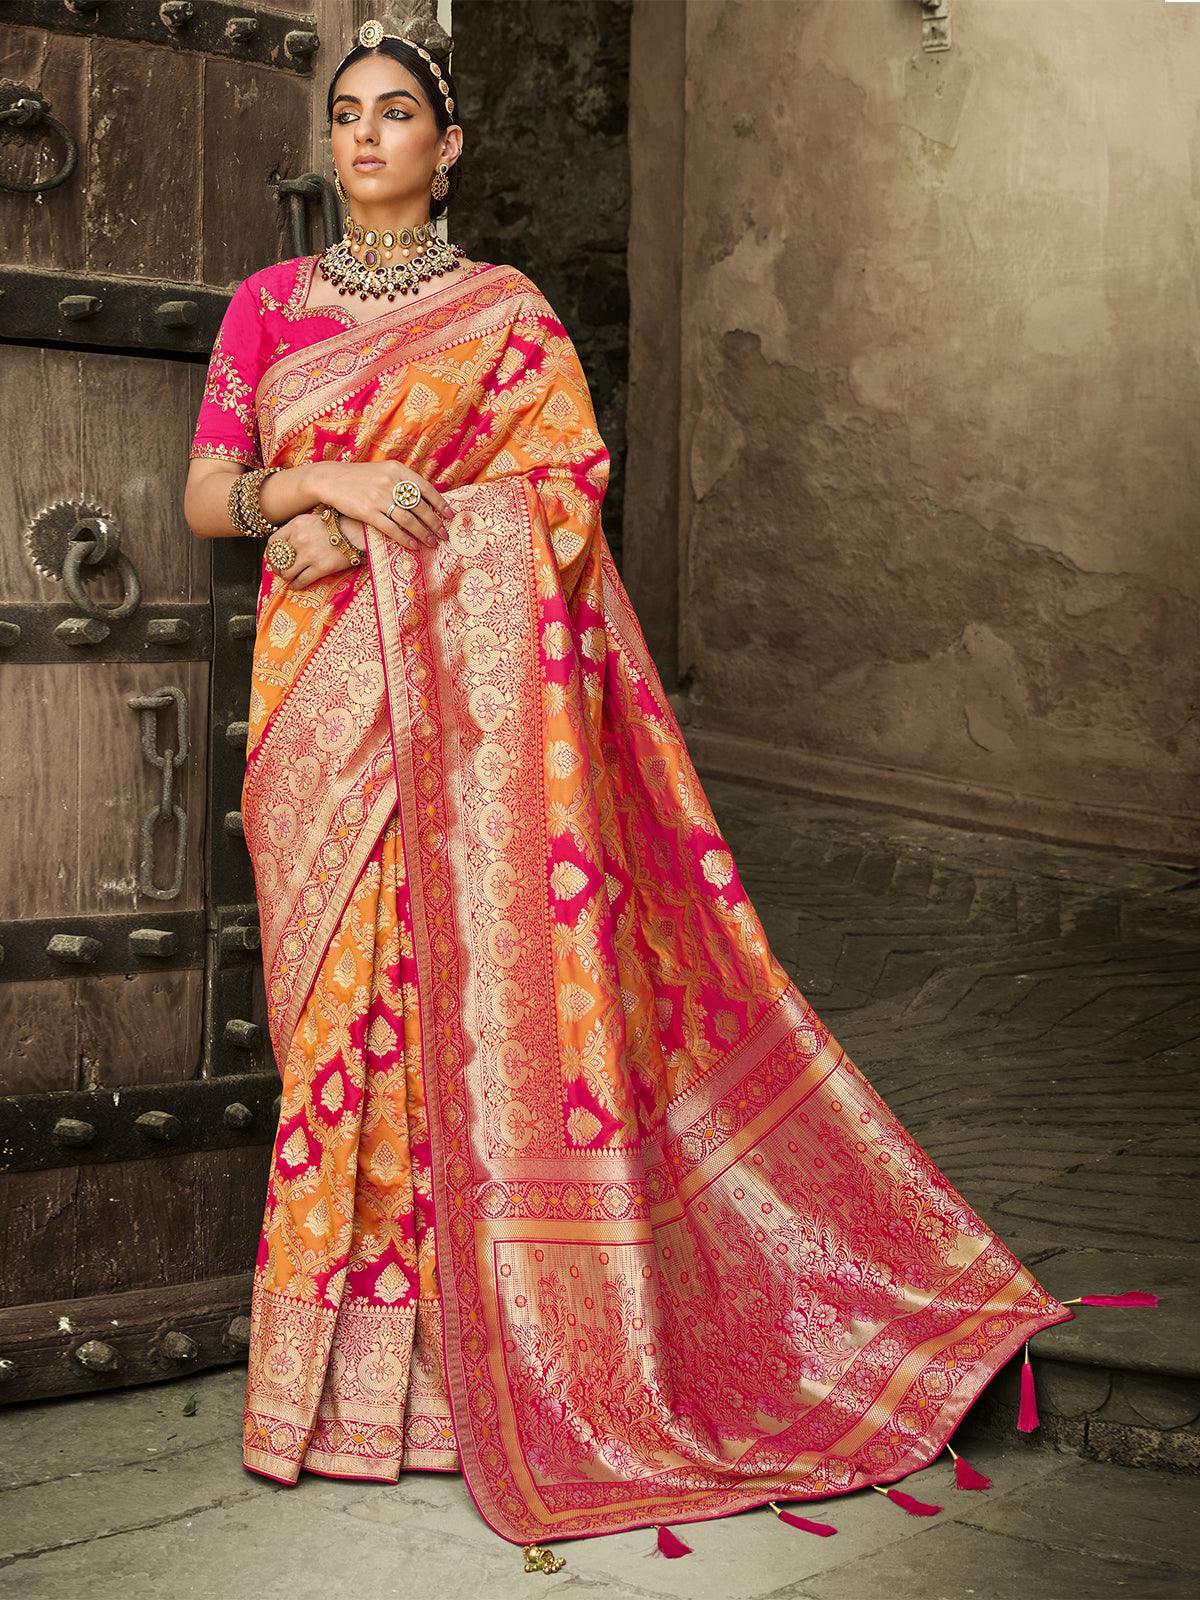 Women's Mustard Jacquard Woven Design Saree With Blouse Piece - Odette